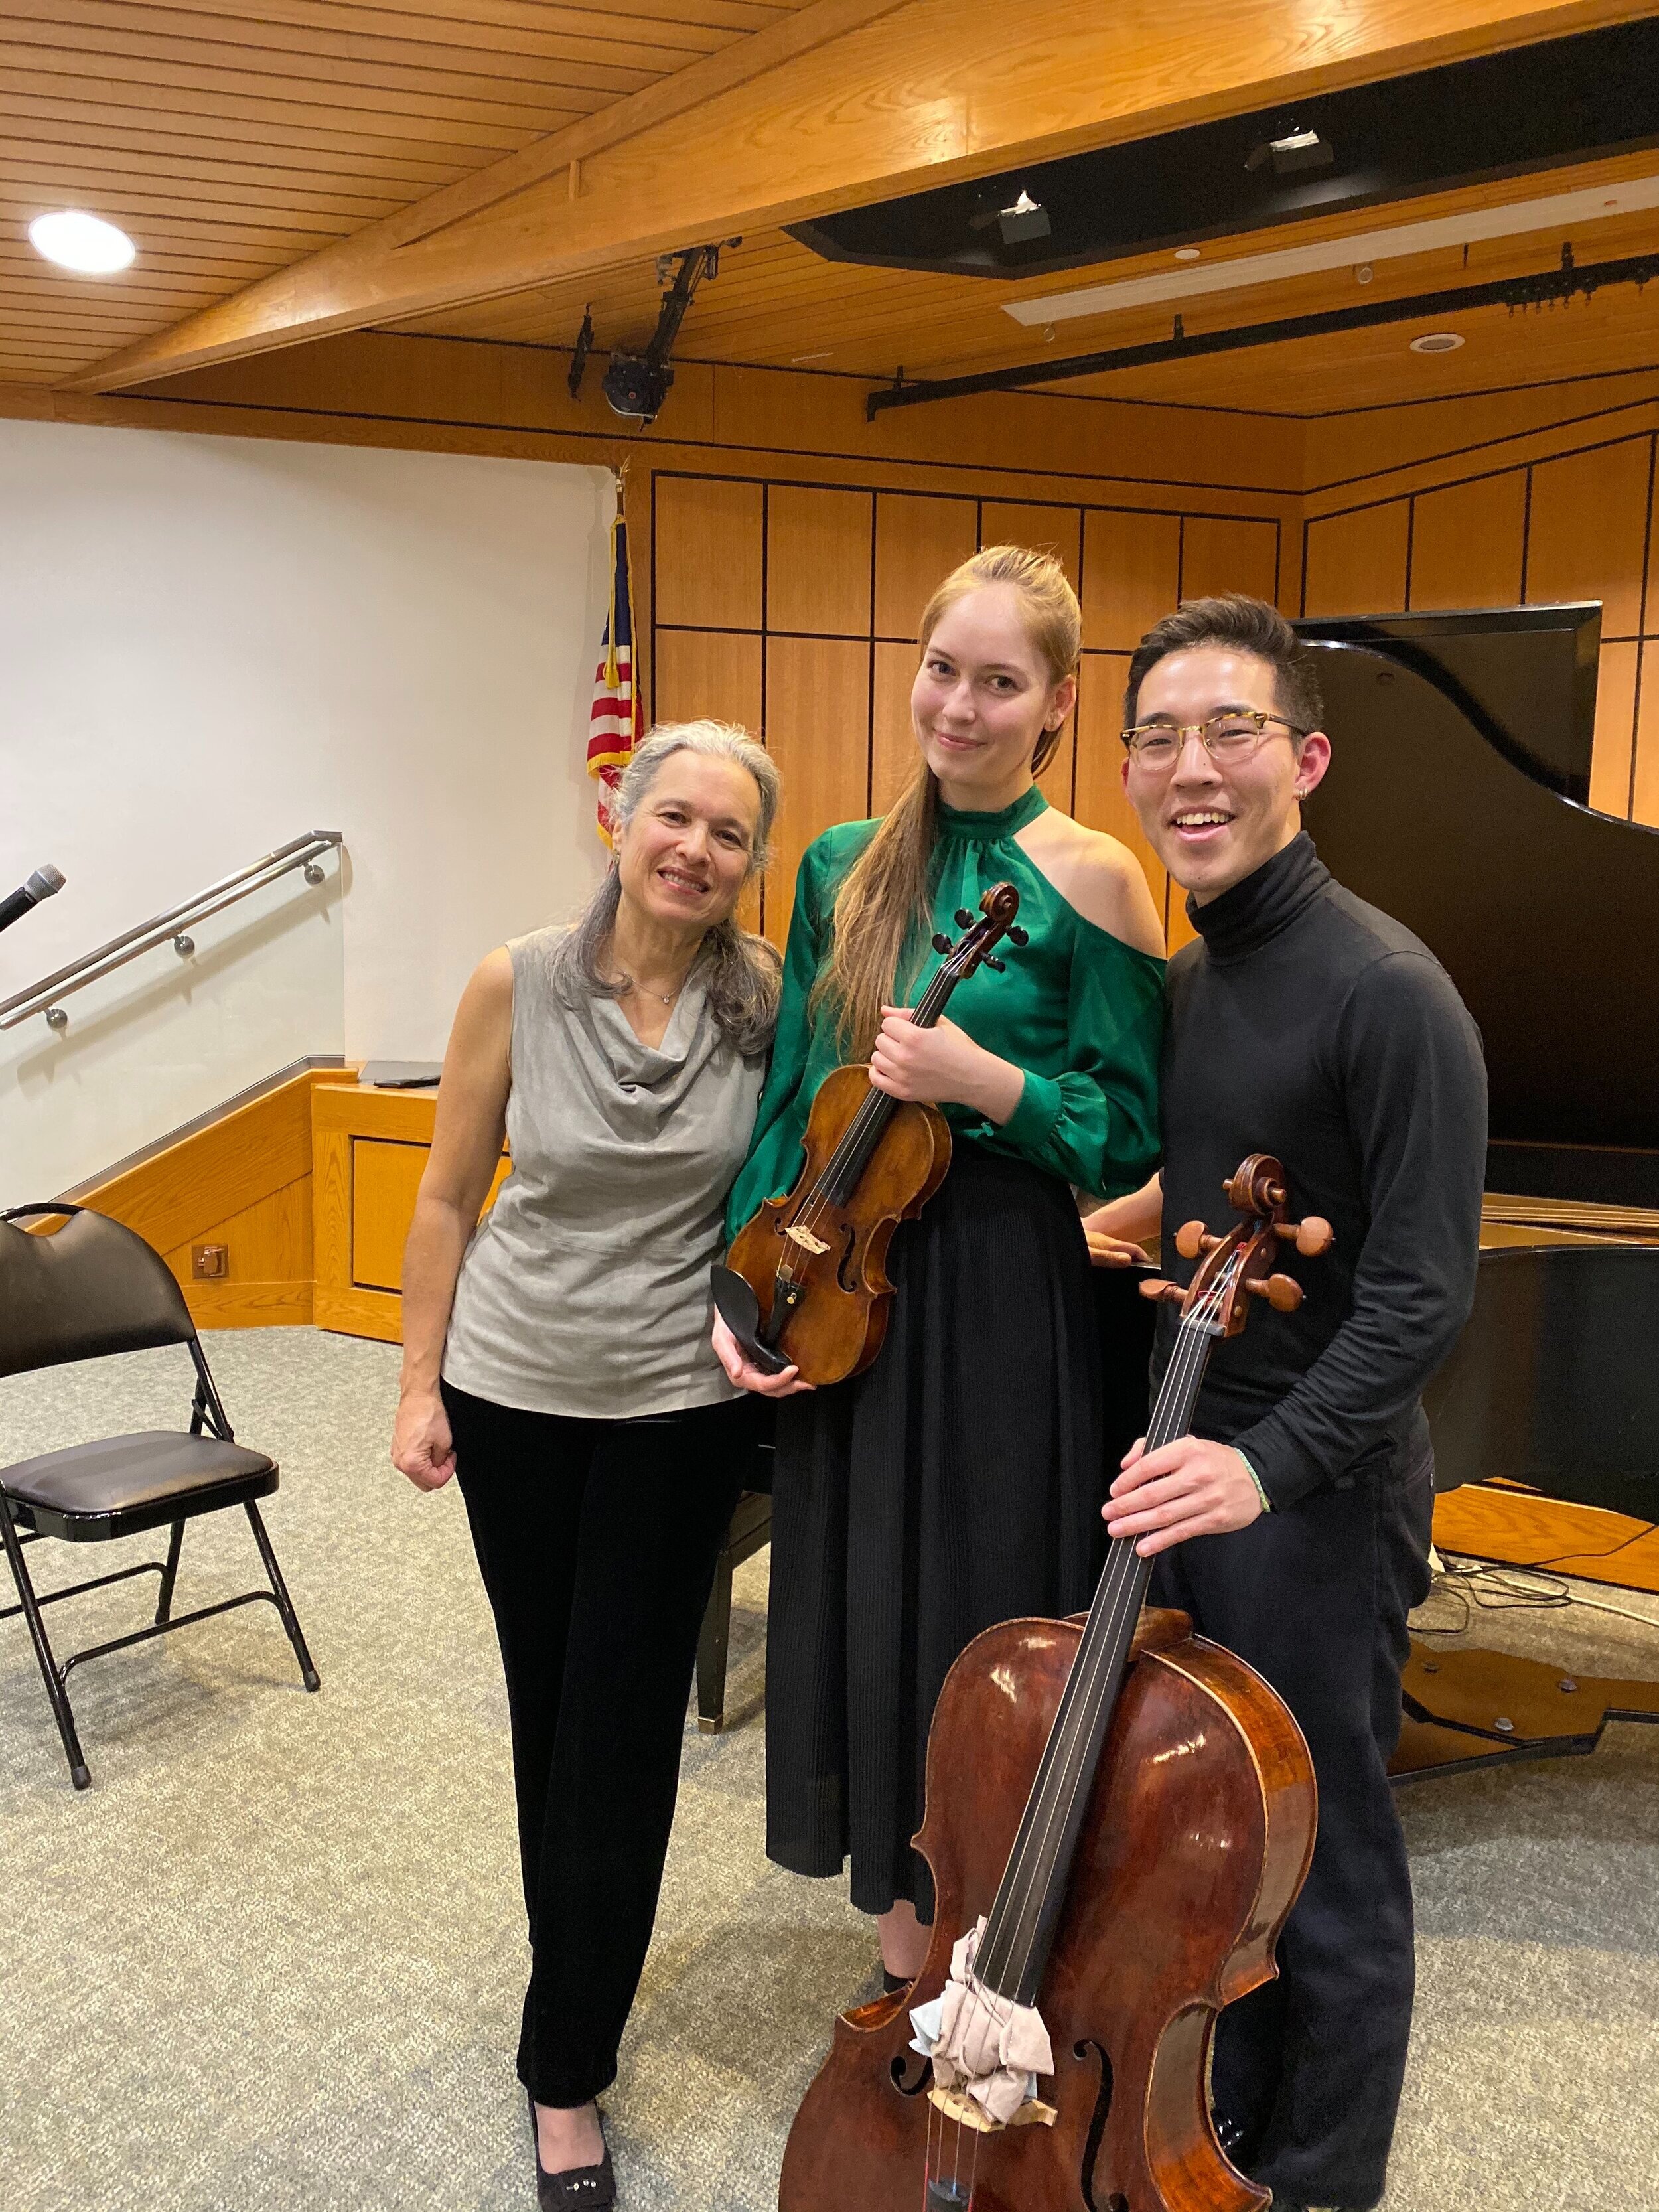  “Musical Contrasts” with Geneva Lewis, violin and Eunghee Cho, cello,  at Carleton Willard Village in Bedford, MA. 